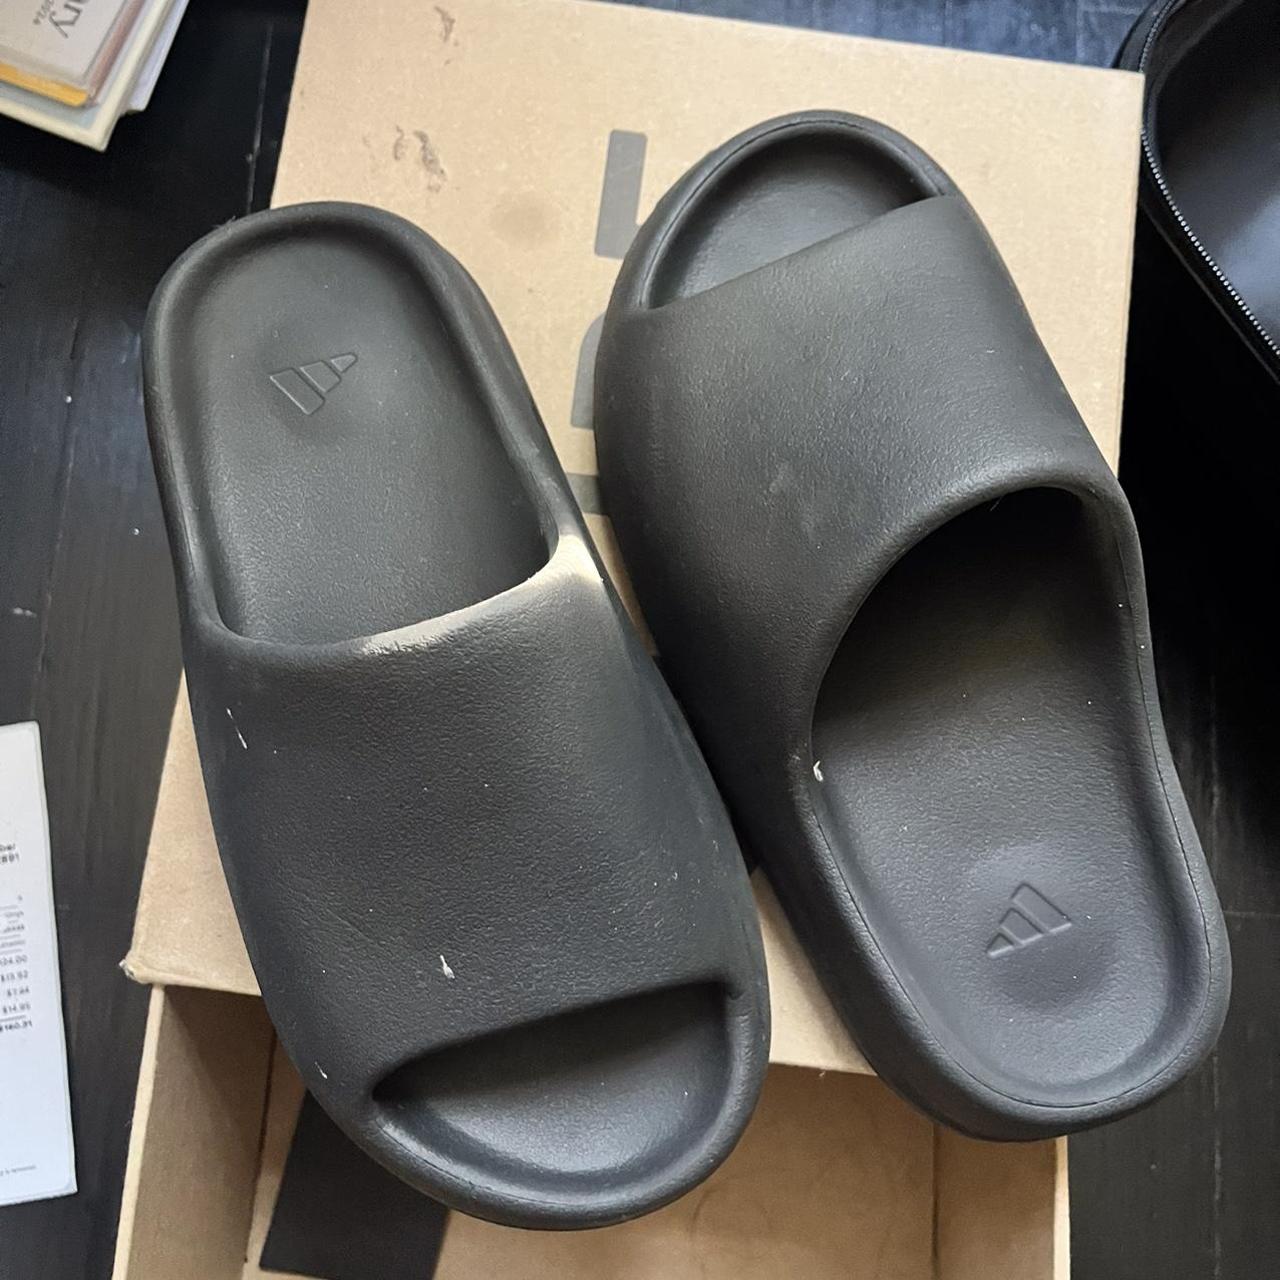 Adidas Yeezy Slides in Color Onyx purchased off... - Depop